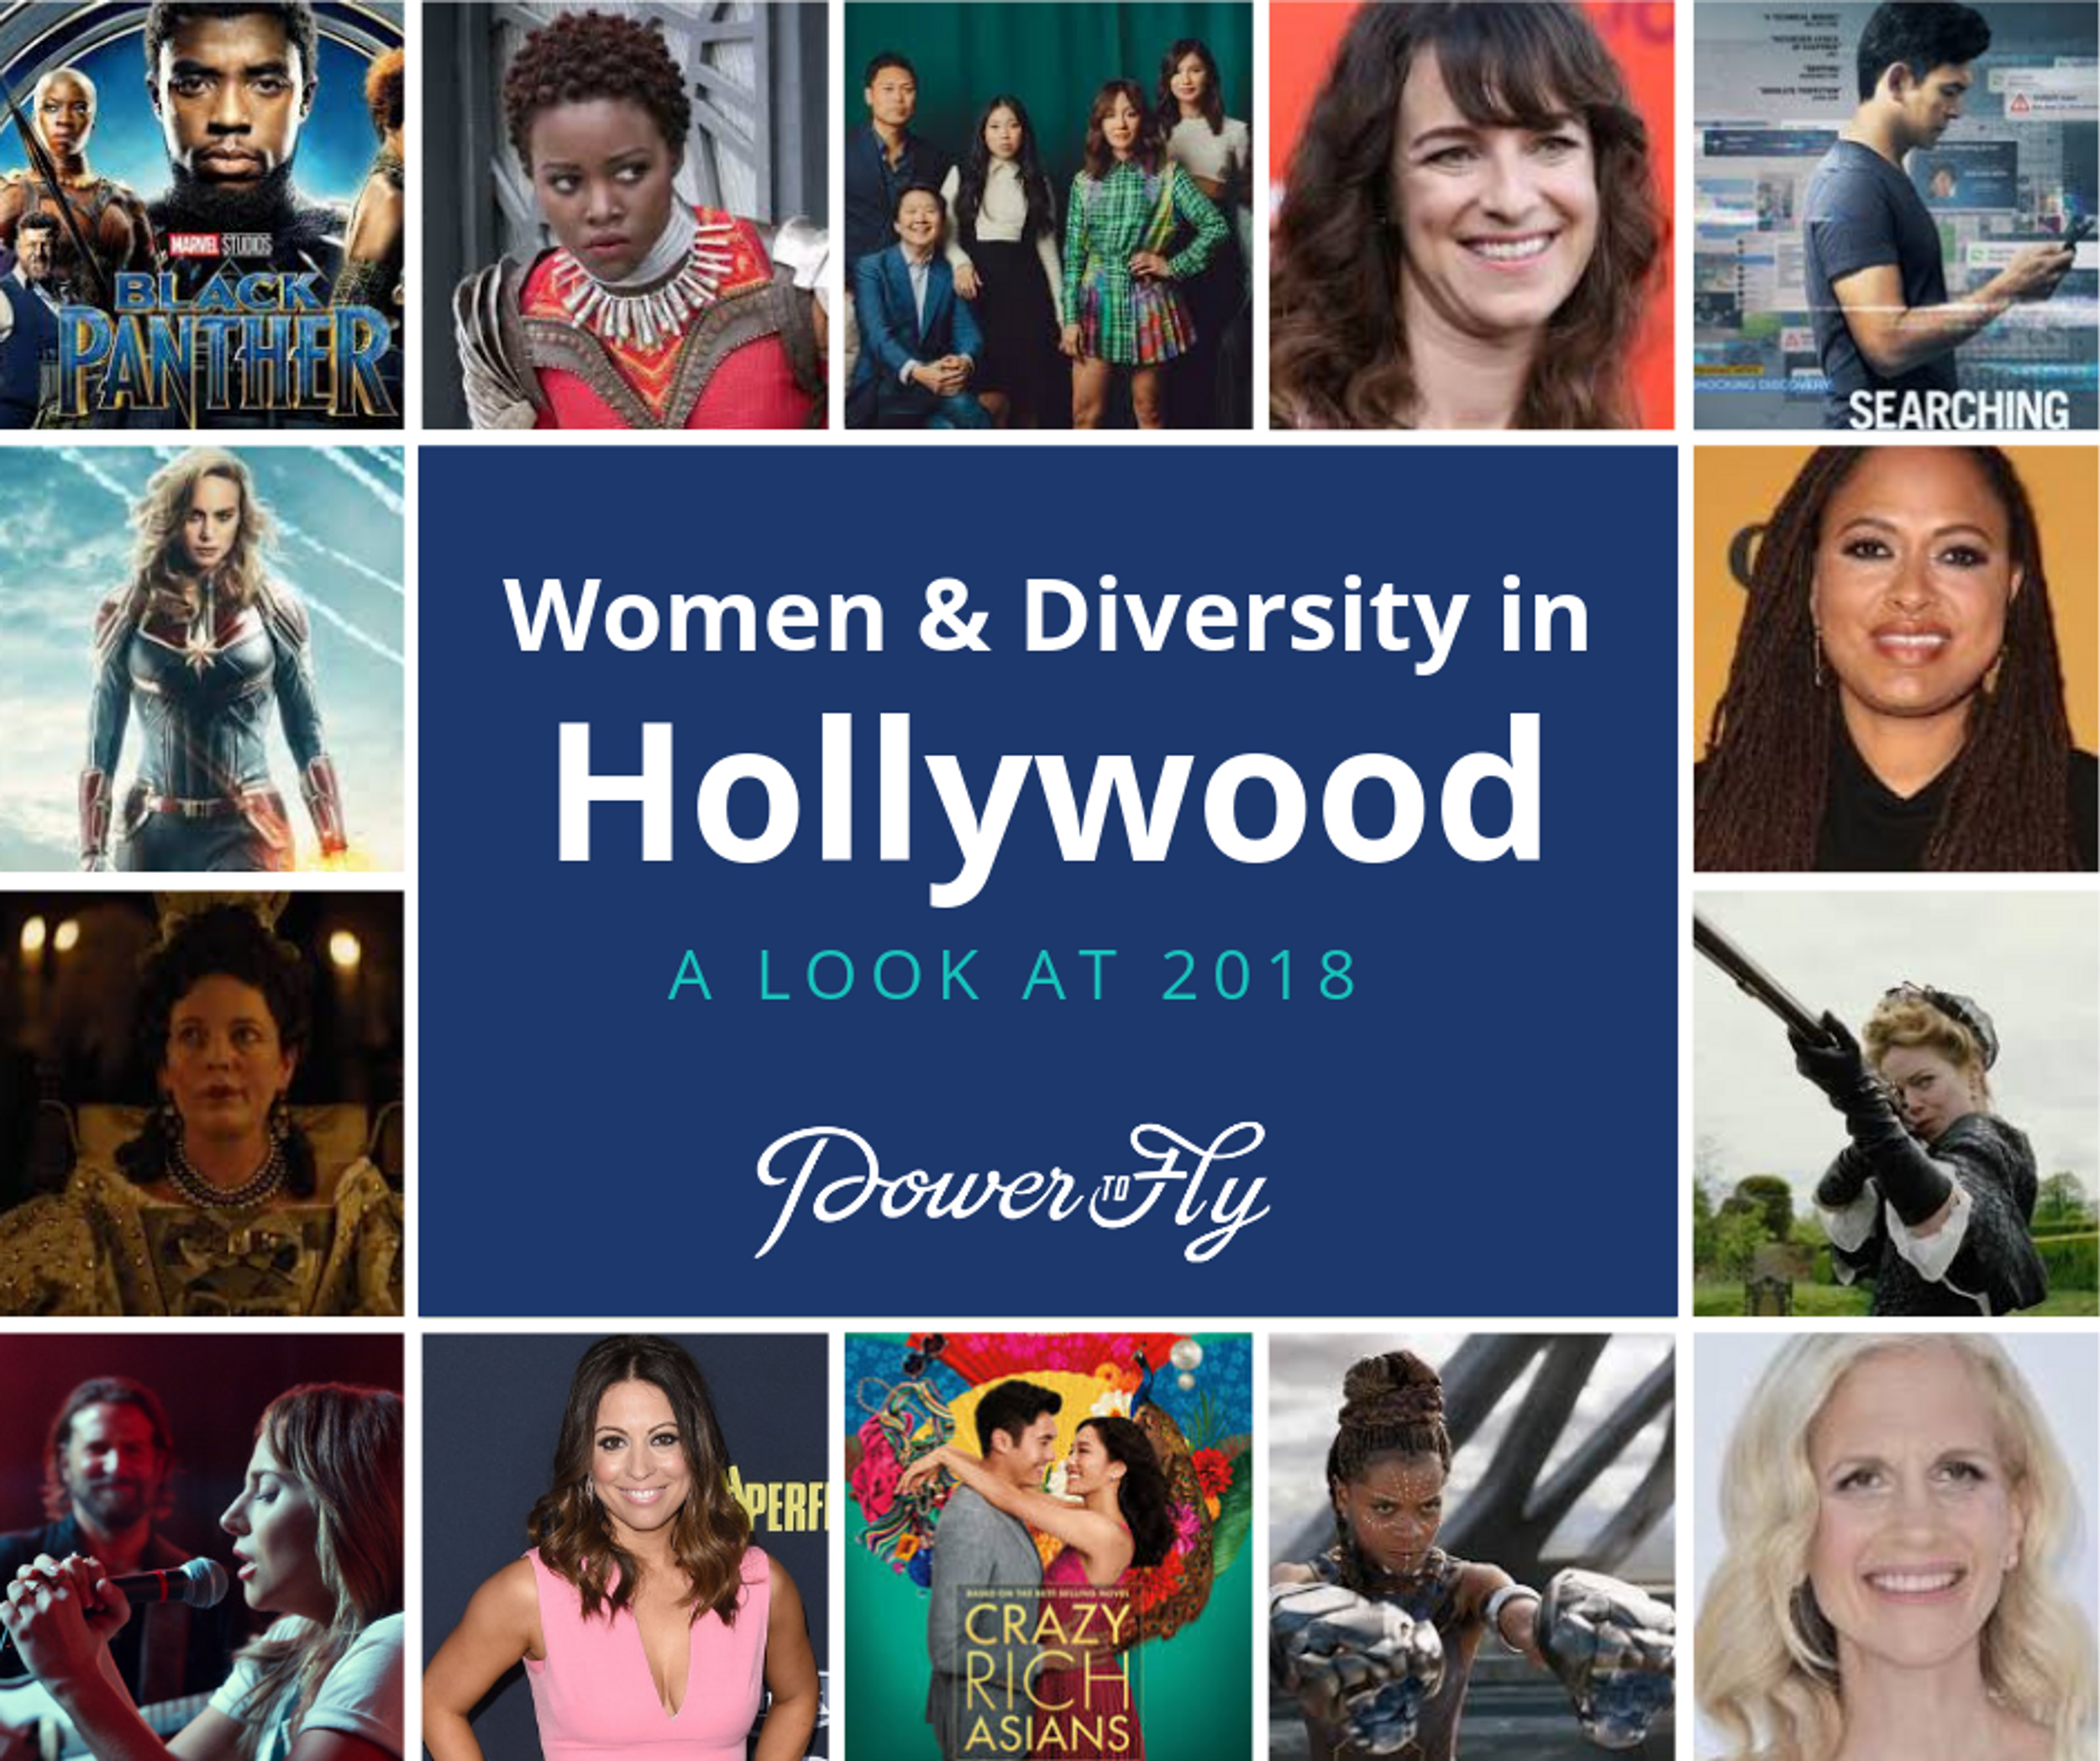 Women & Diversity in Hollywood: A Look at 2018